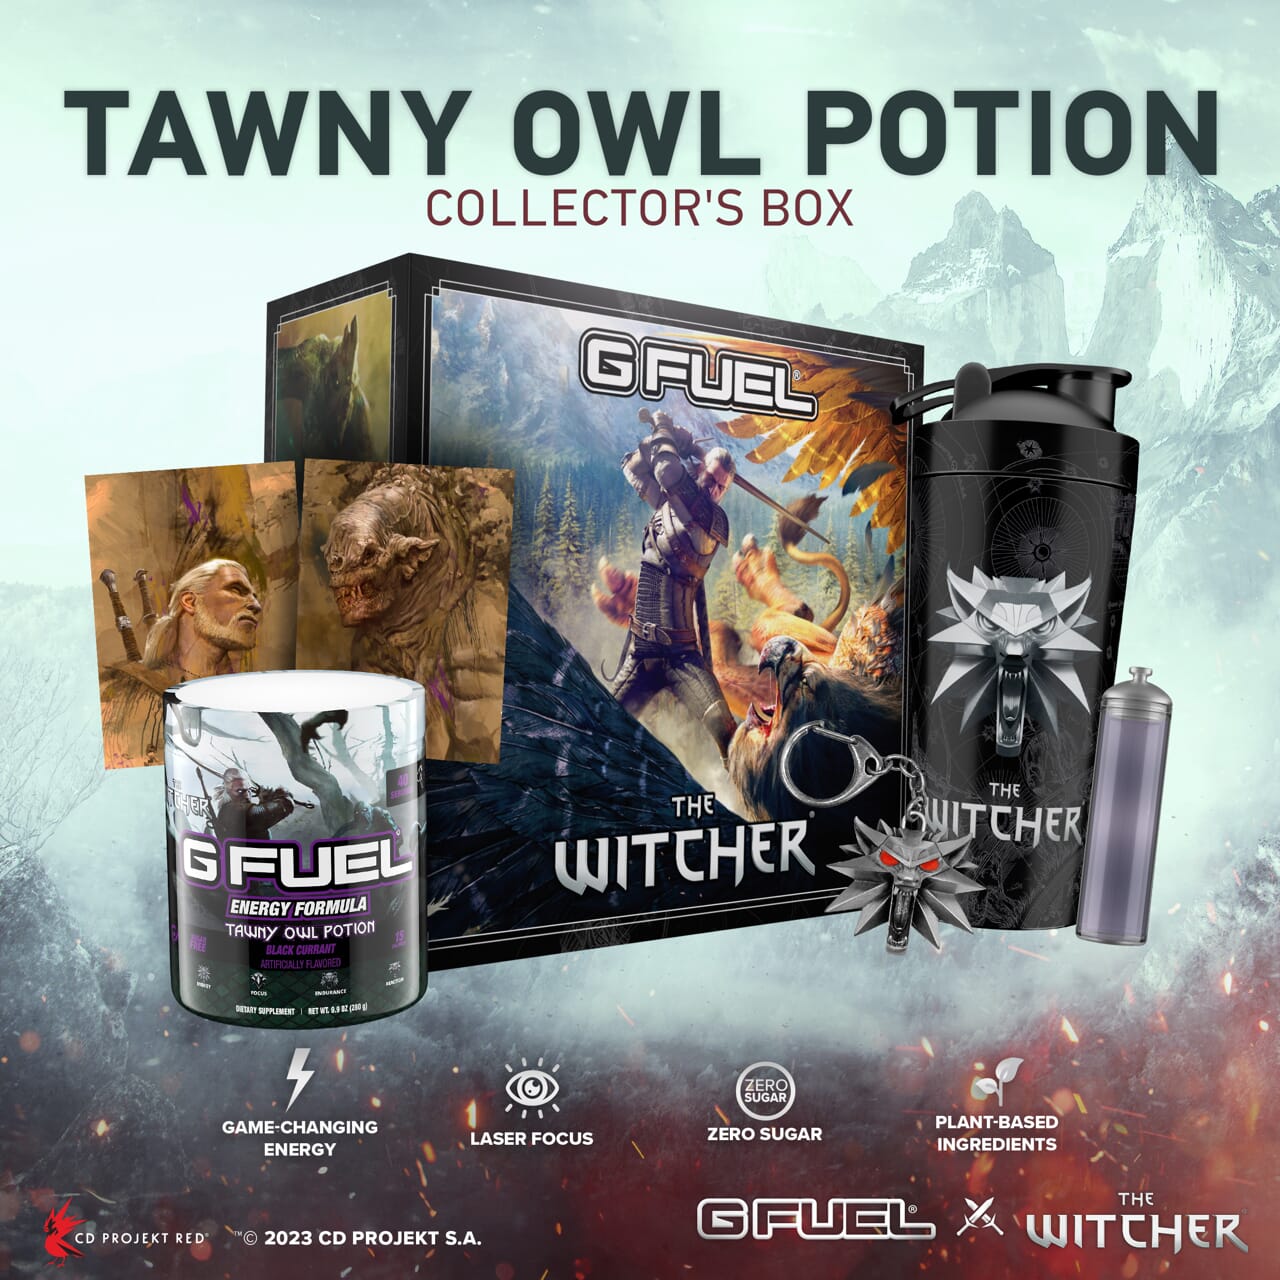 G FUEL Tawny Owl Potion Collector's Box, inspired by "The Witcher"